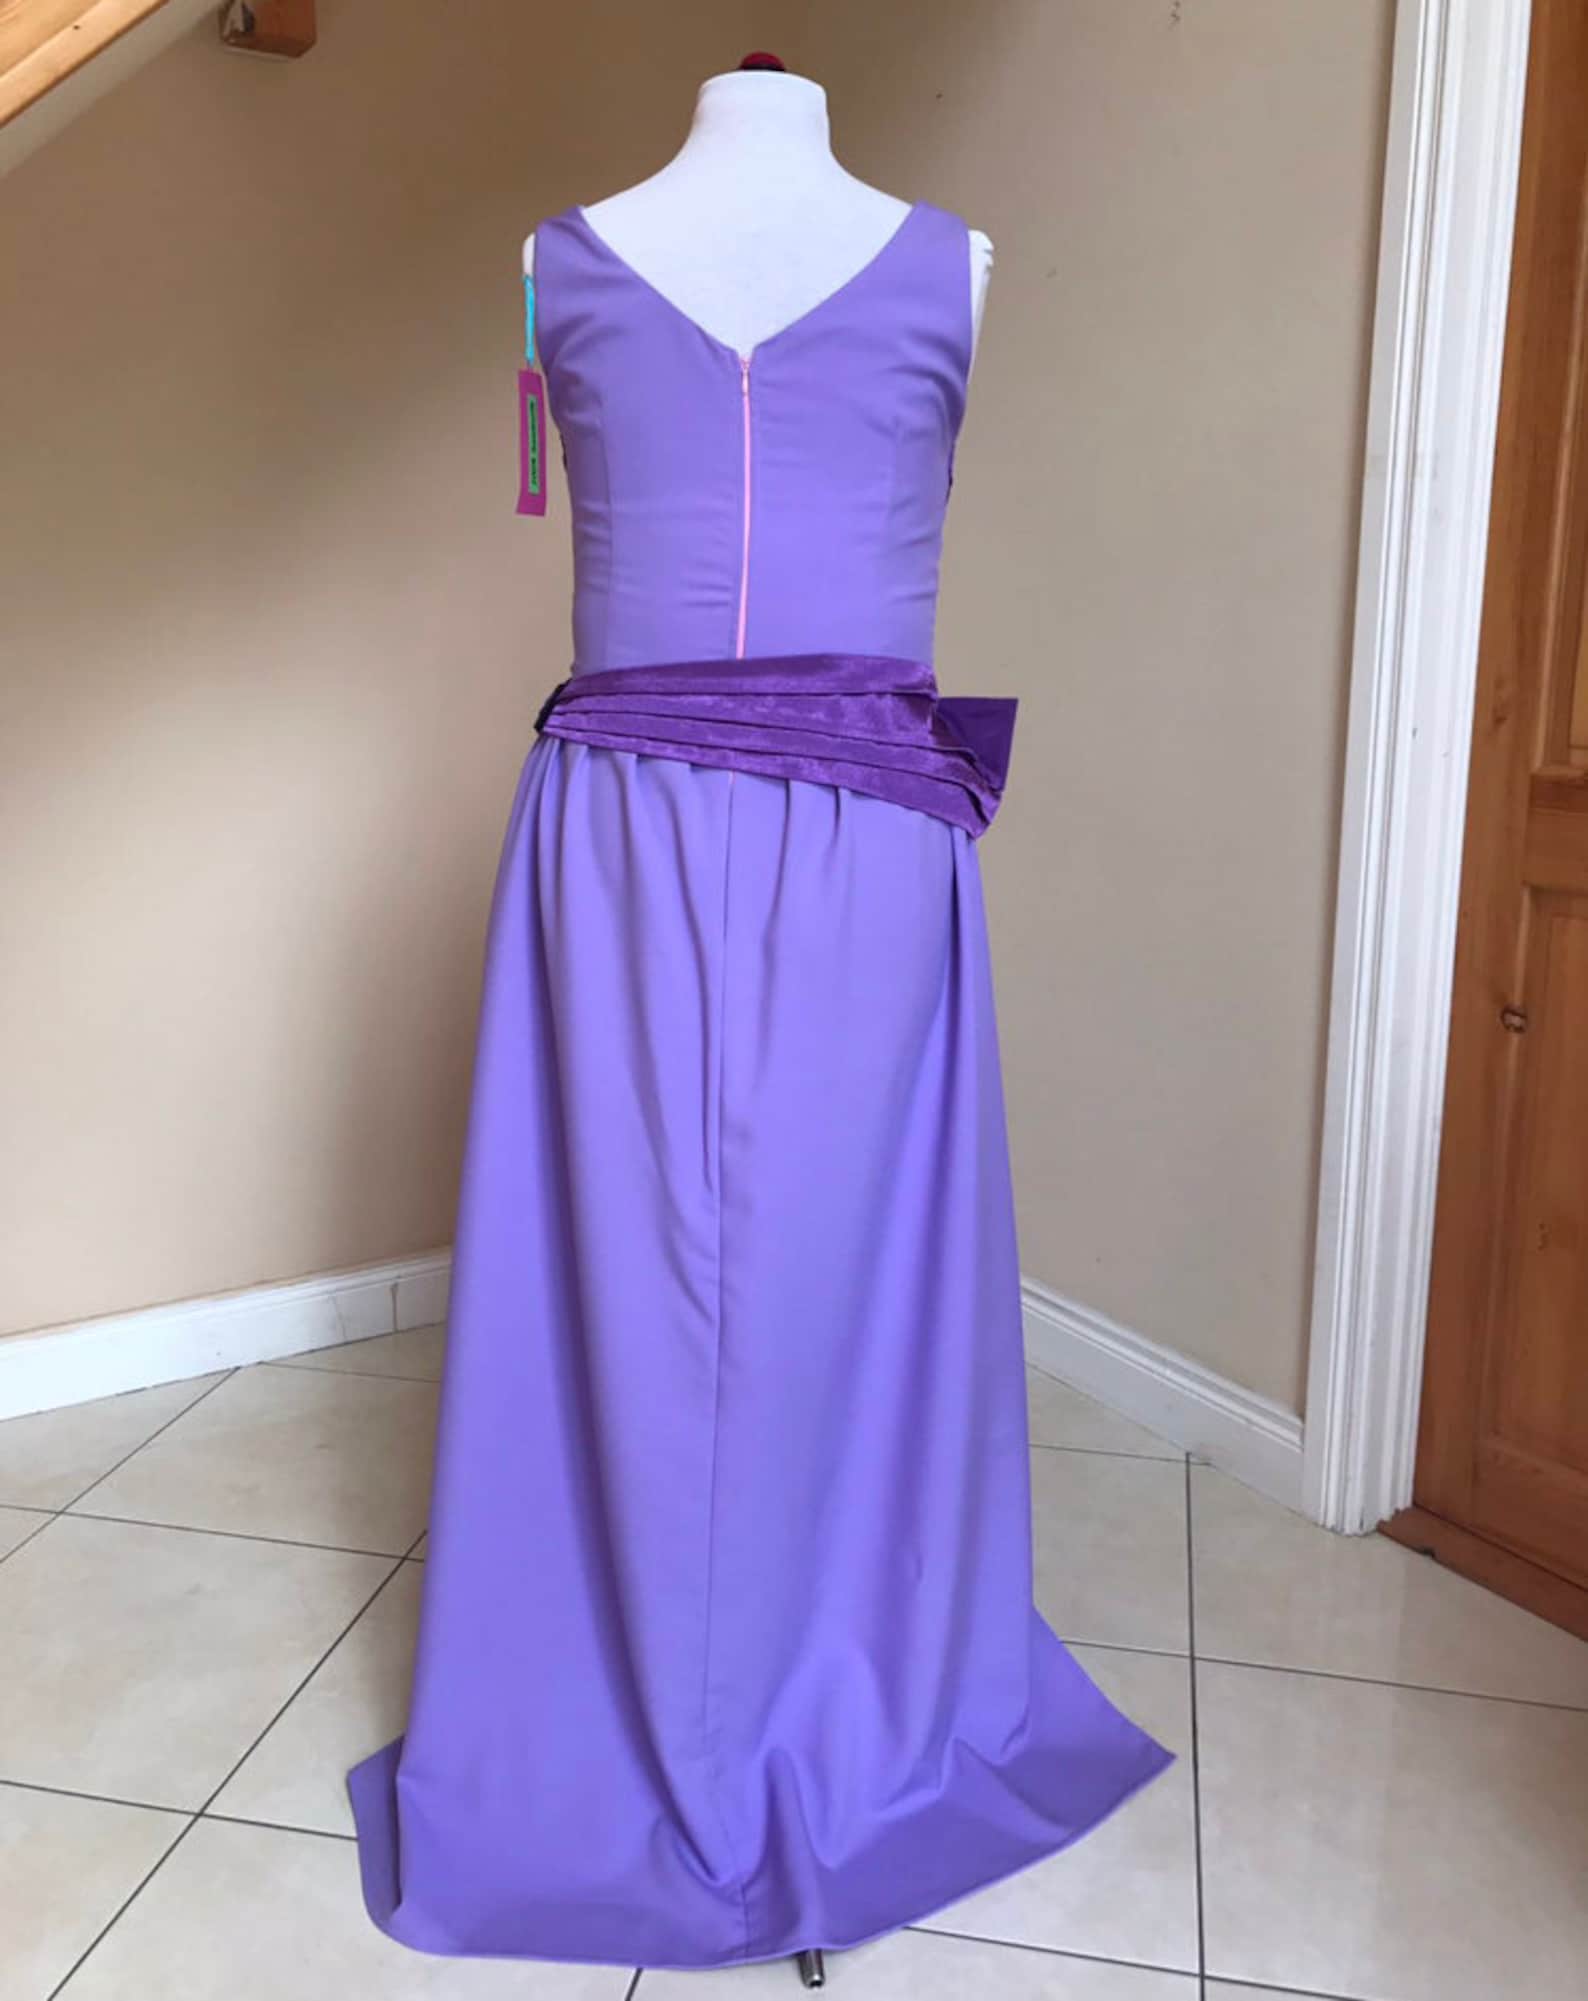 Megara inspired dress MADE TO MEASURE only. | Etsy